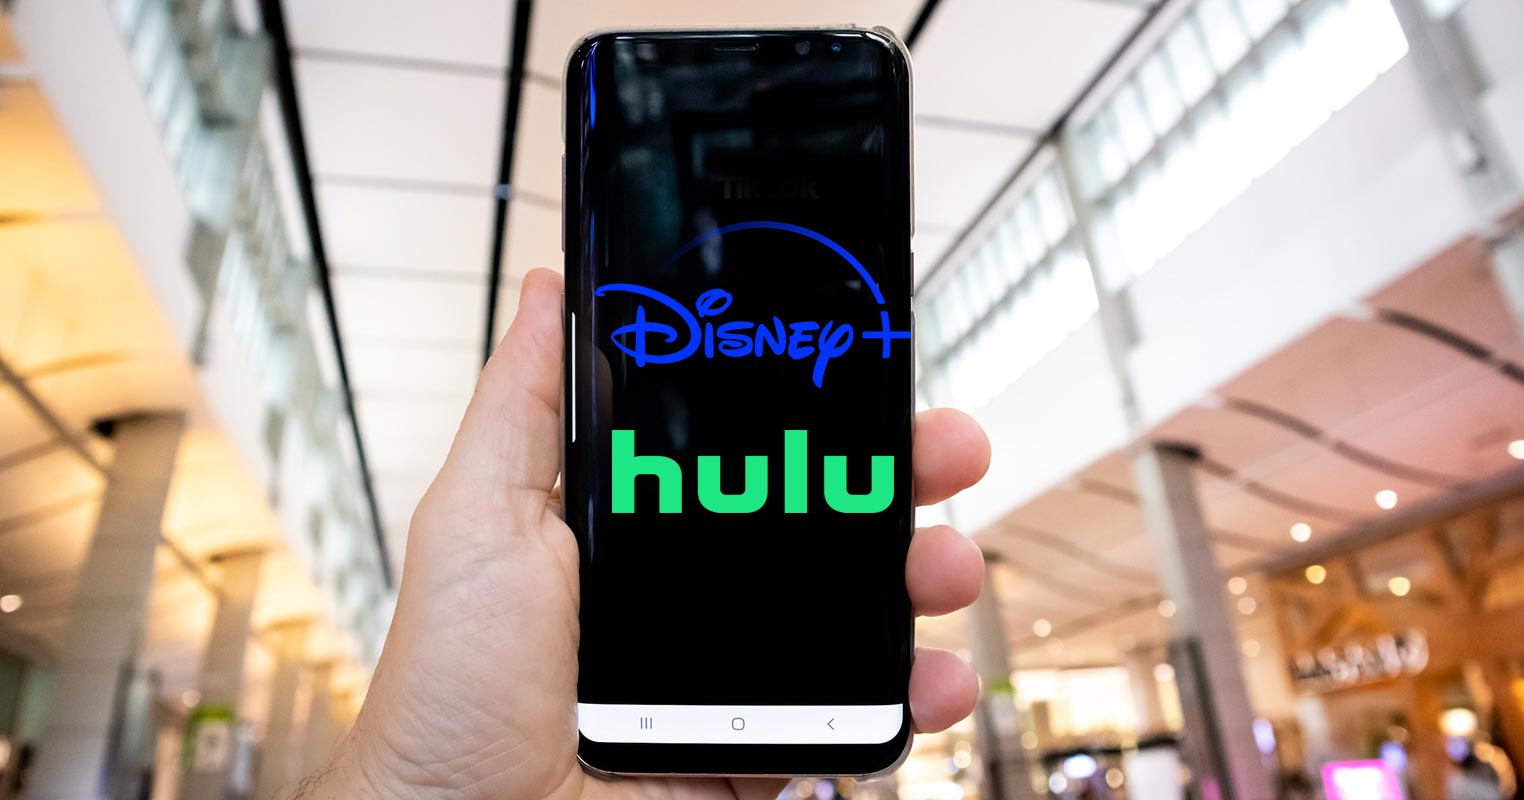 Disney Plus acquired Hulu Android Mobile